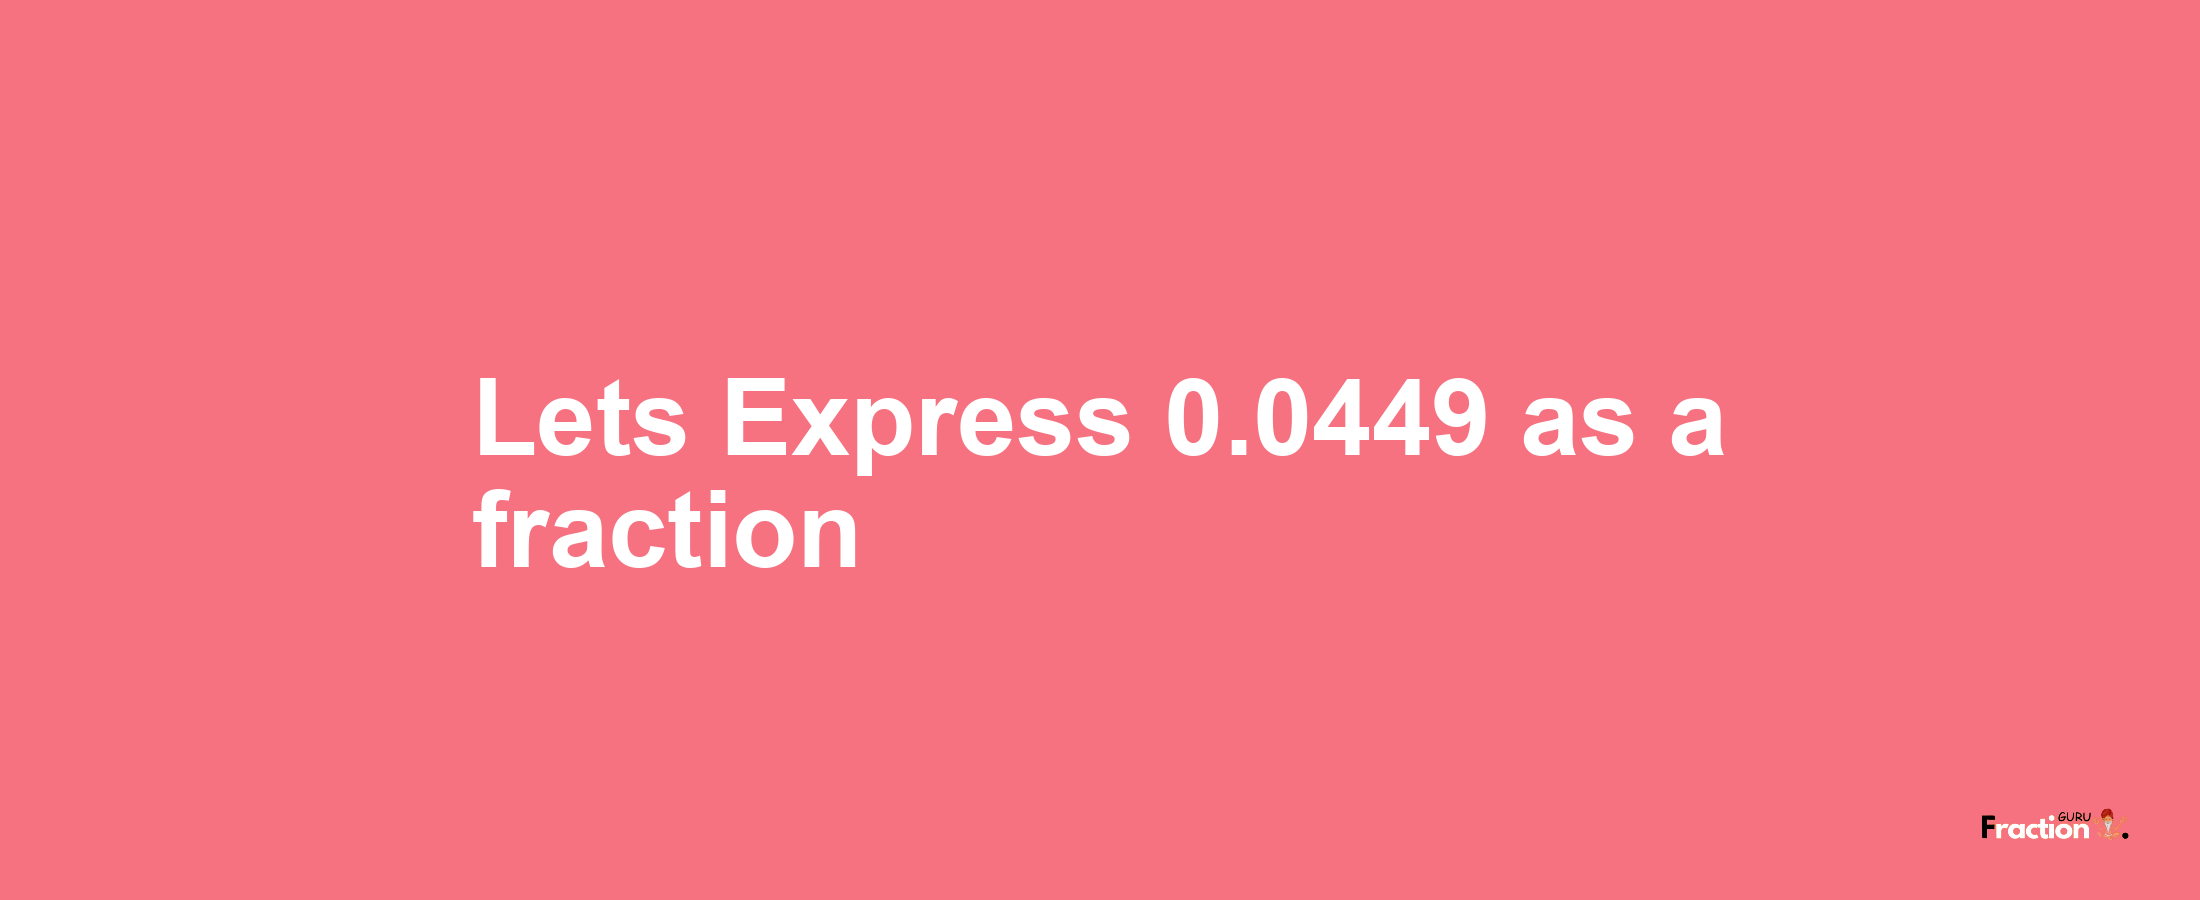 Lets Express 0.0449 as afraction